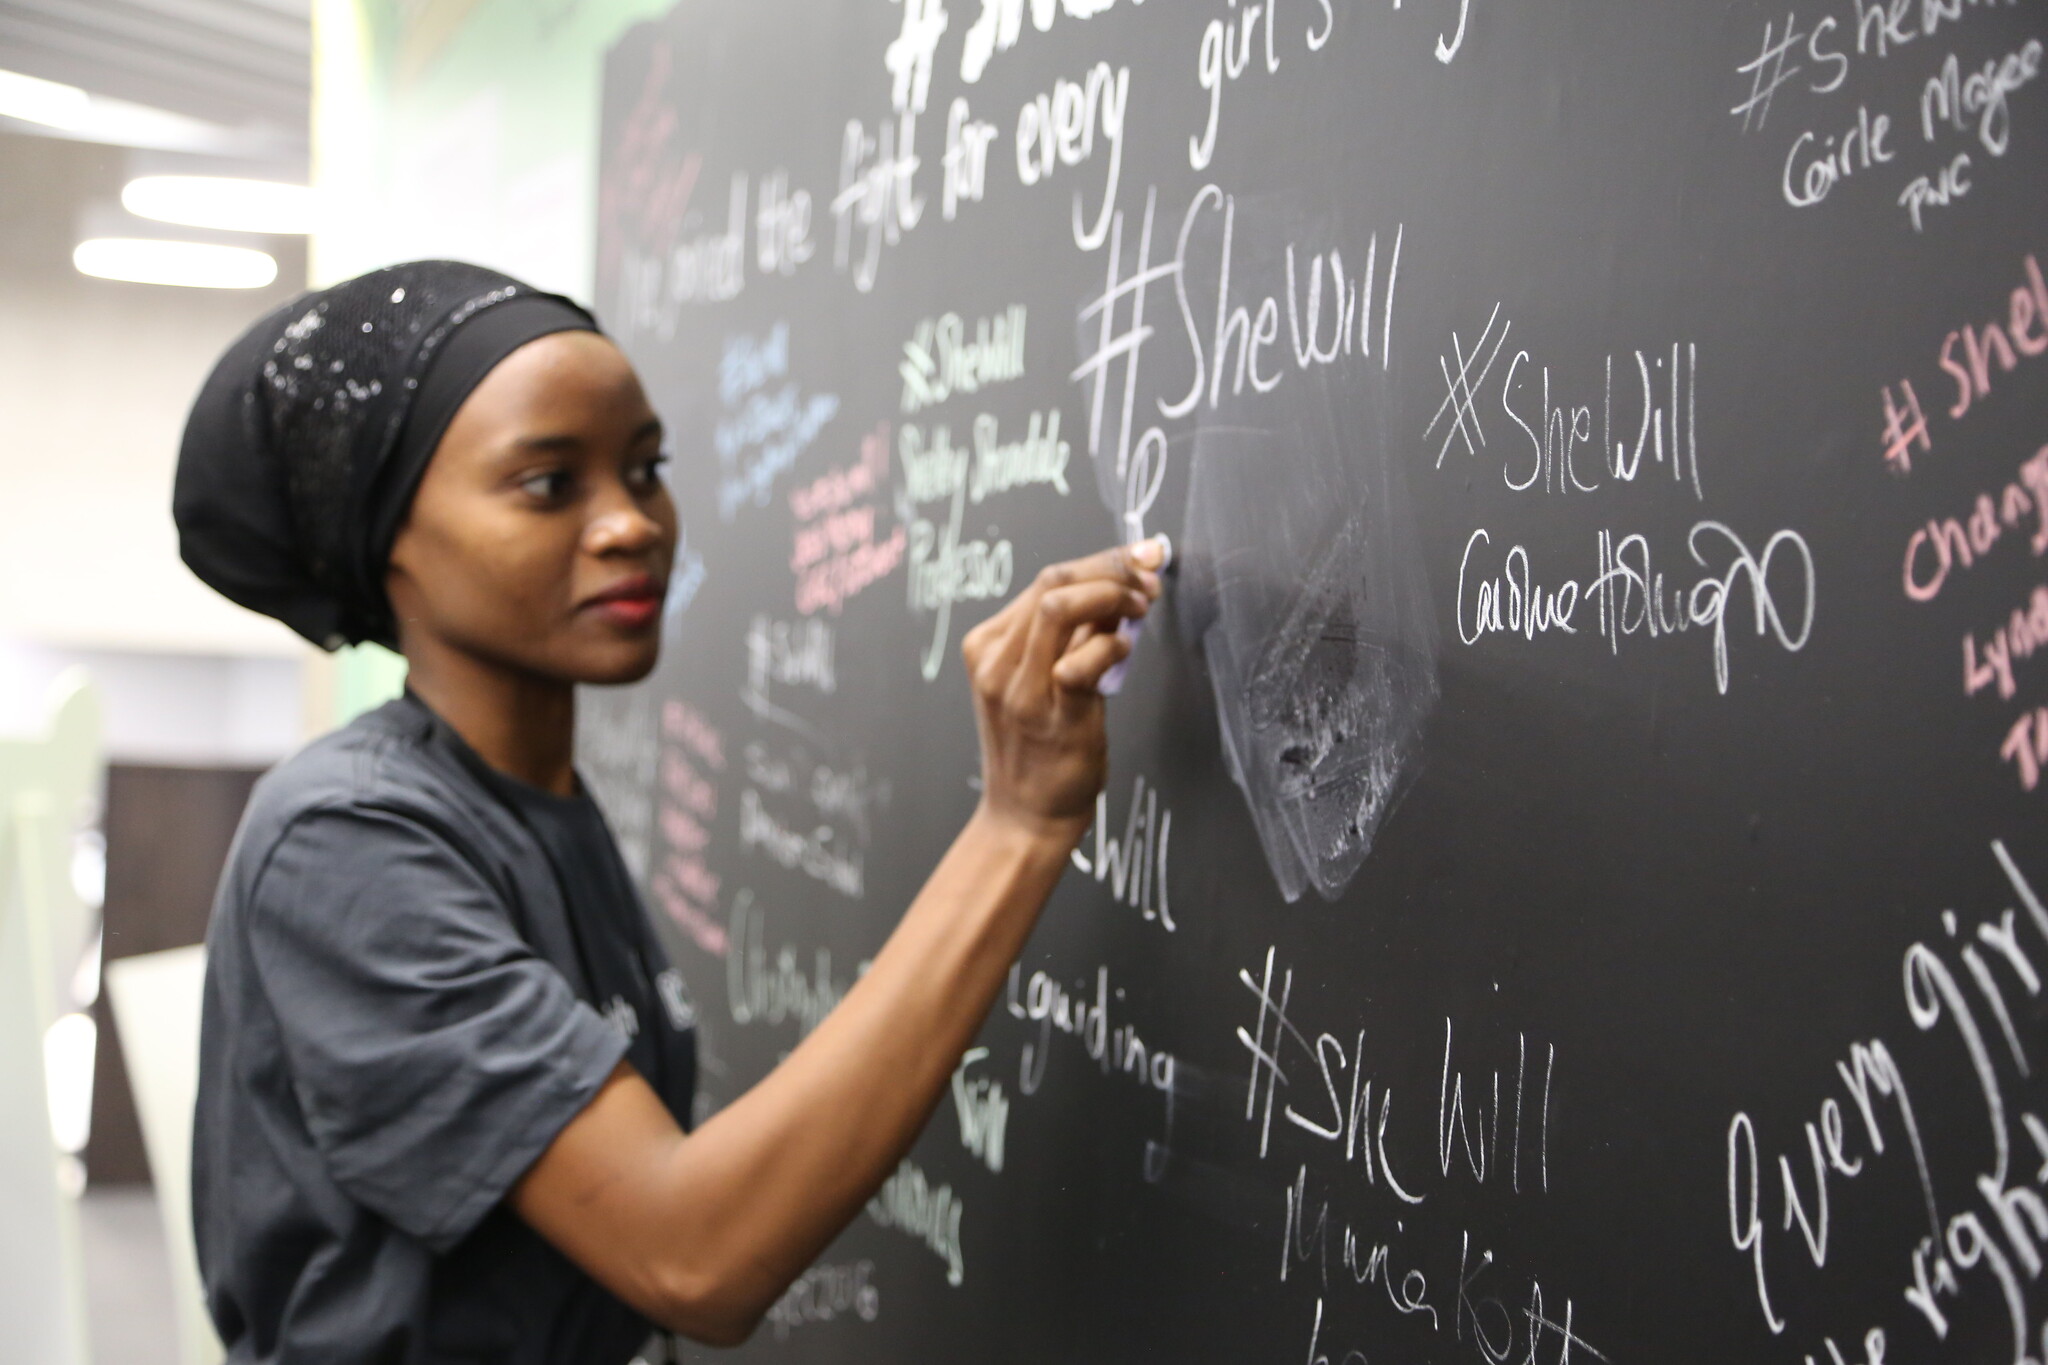 A delegate signs the #SheWill wall at the Girls' Education Forum, London, 7 July 2016